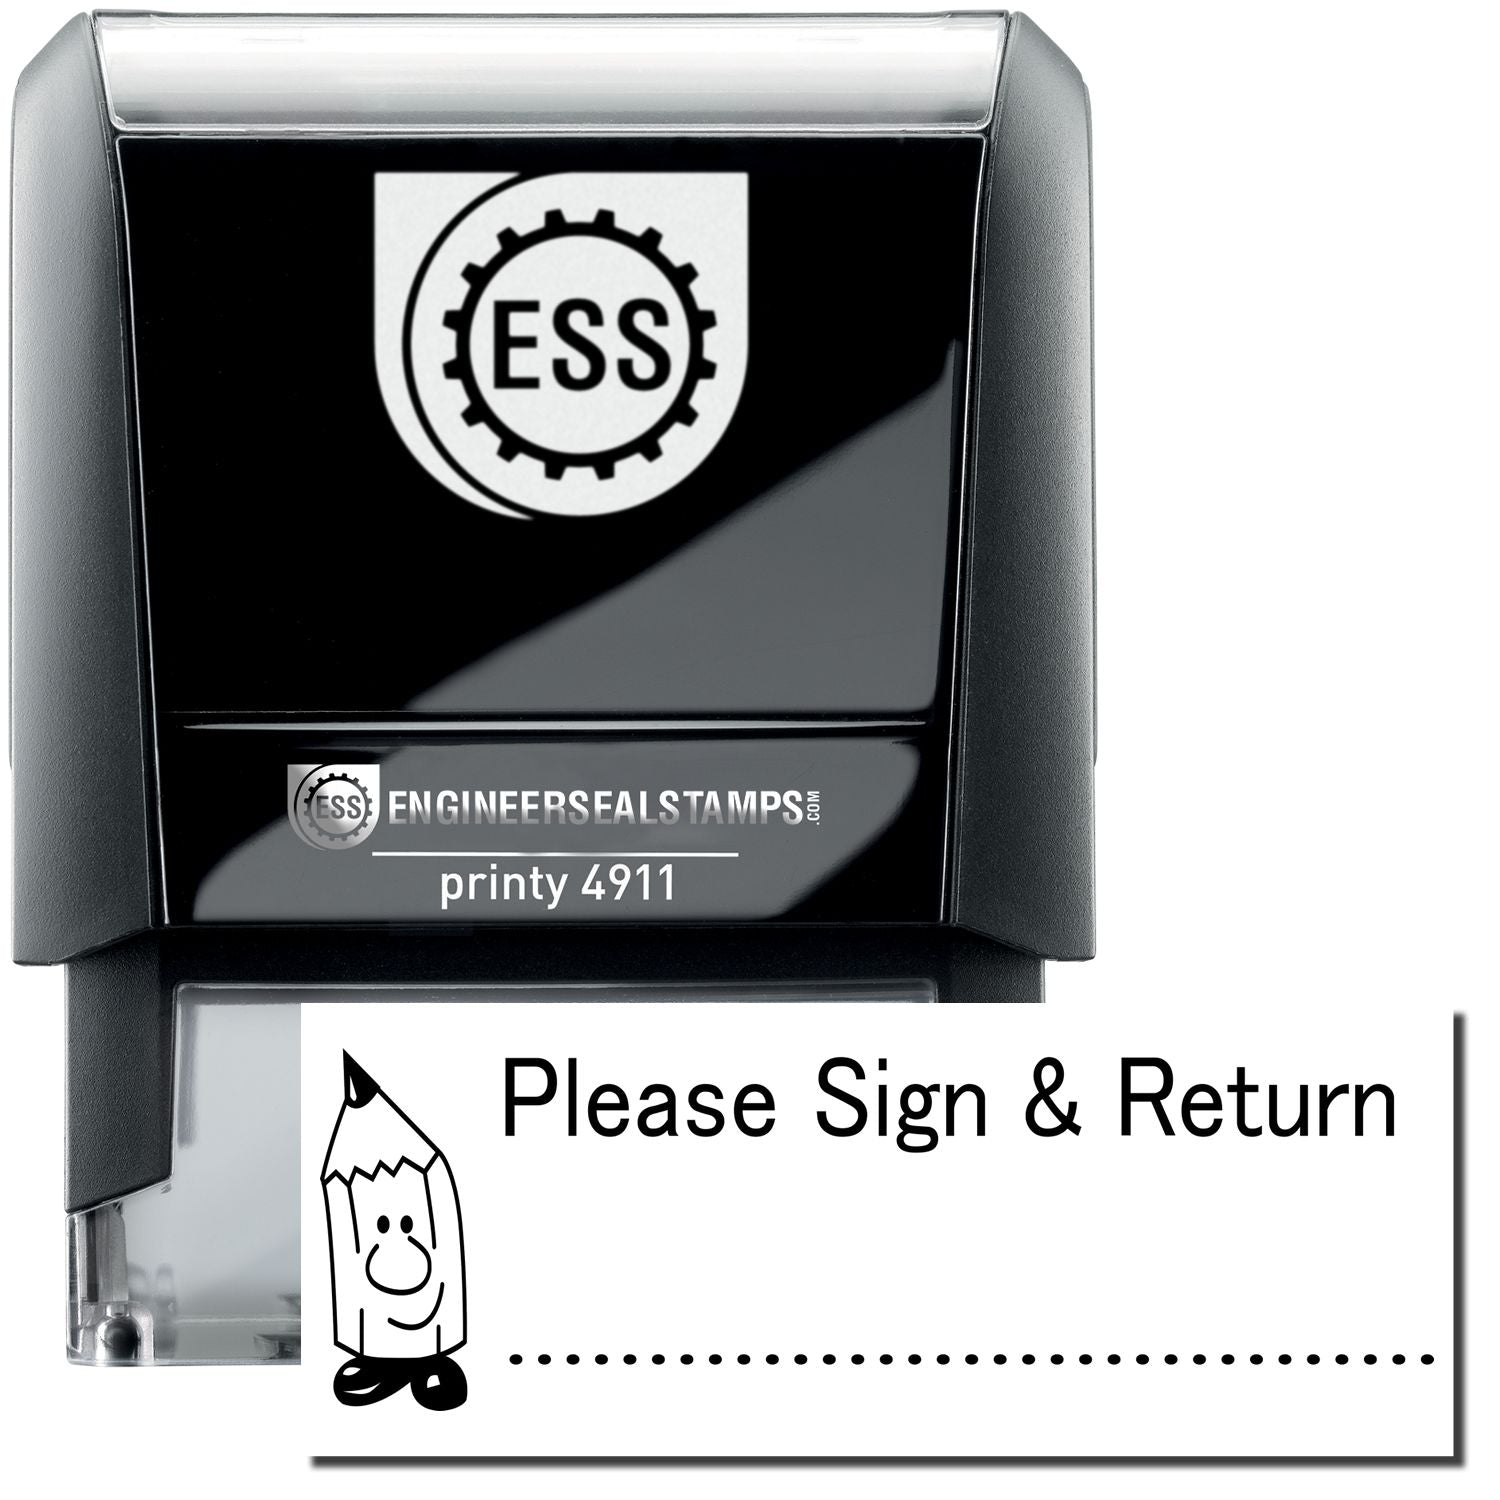 A self-inking stamp with a stamped image showing how the text "Please Sign & Return" with an image of a sharpened pencil and a dotted line is displayed after stamping.